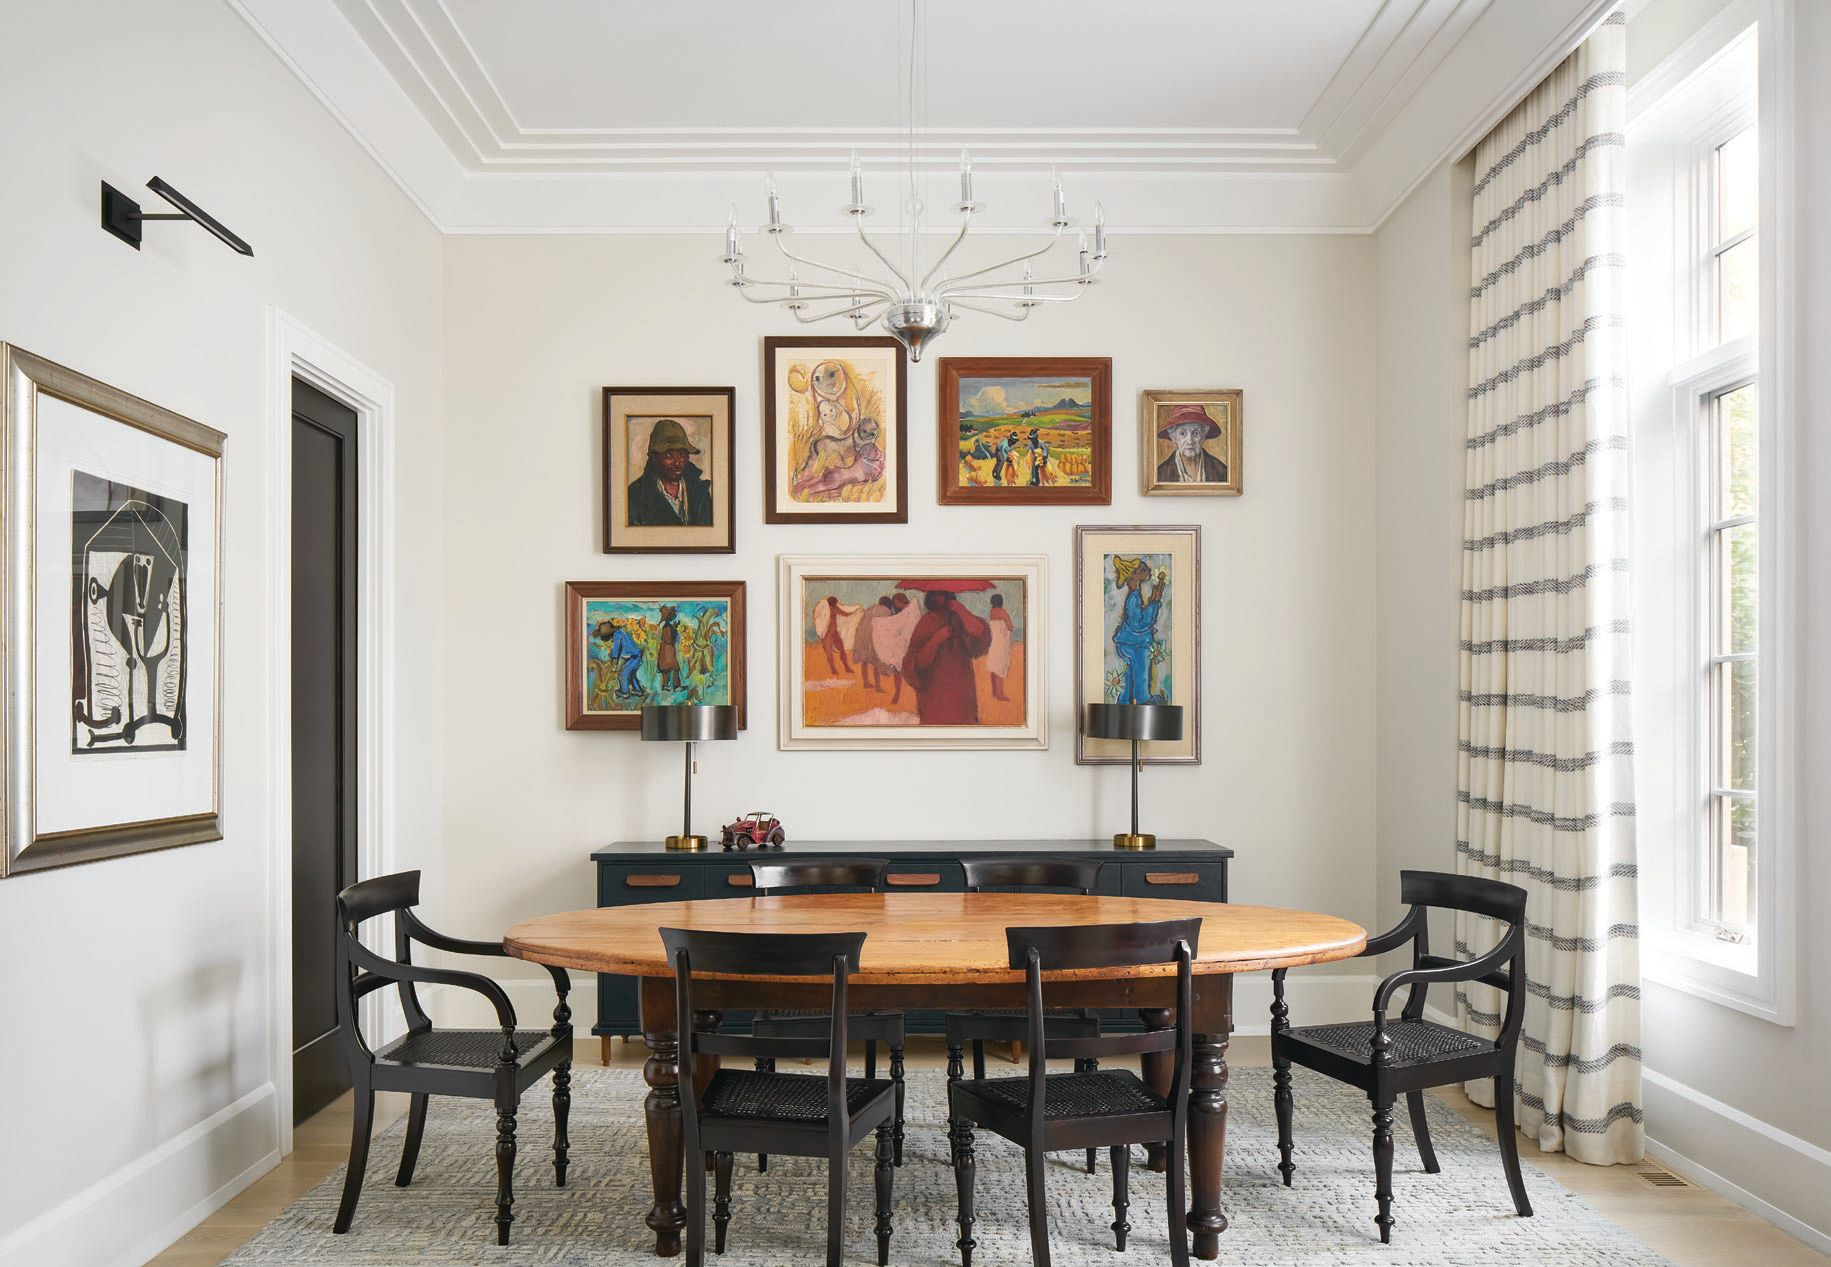 Notes Abrams of his design philosophy, “I believe next to the people in the room, the artwork is the most important element. Knowing this client has a large collection of paintings, we wanted to create a gallery wall in the dining room. The ceiling height, the natural north light and the neutral design palette provided the best backdrop for showcasing their unique collection of paintings.” PHOTO BY RYAN MCDONALD